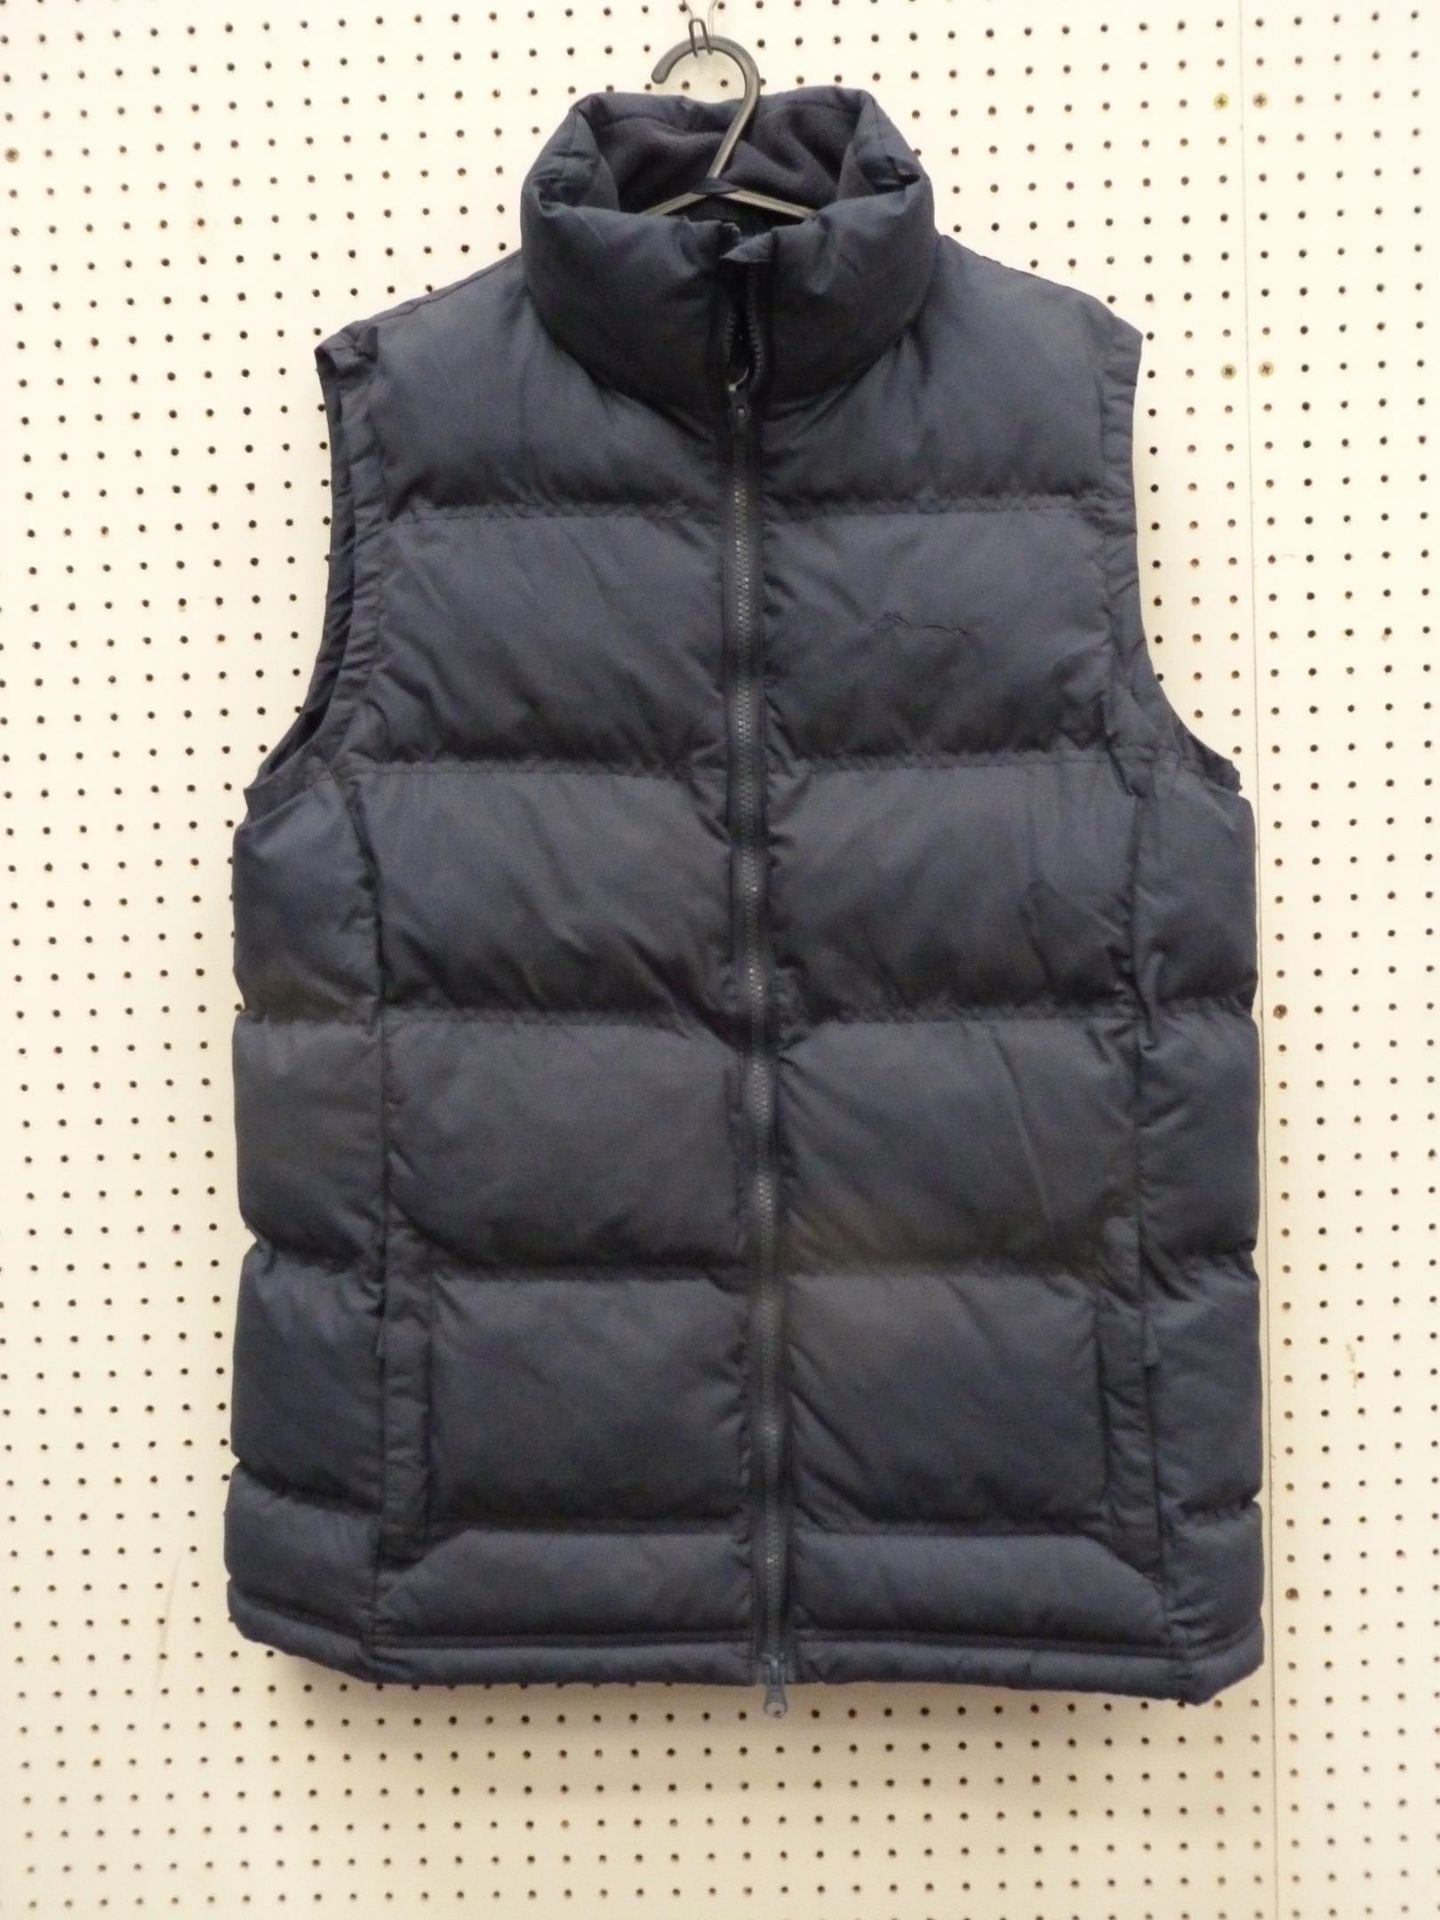 * Two Ladies 'Bridleway' Padded Gilets in Black; one X Small, one Medium together with a Shires - Bild 5 aus 6